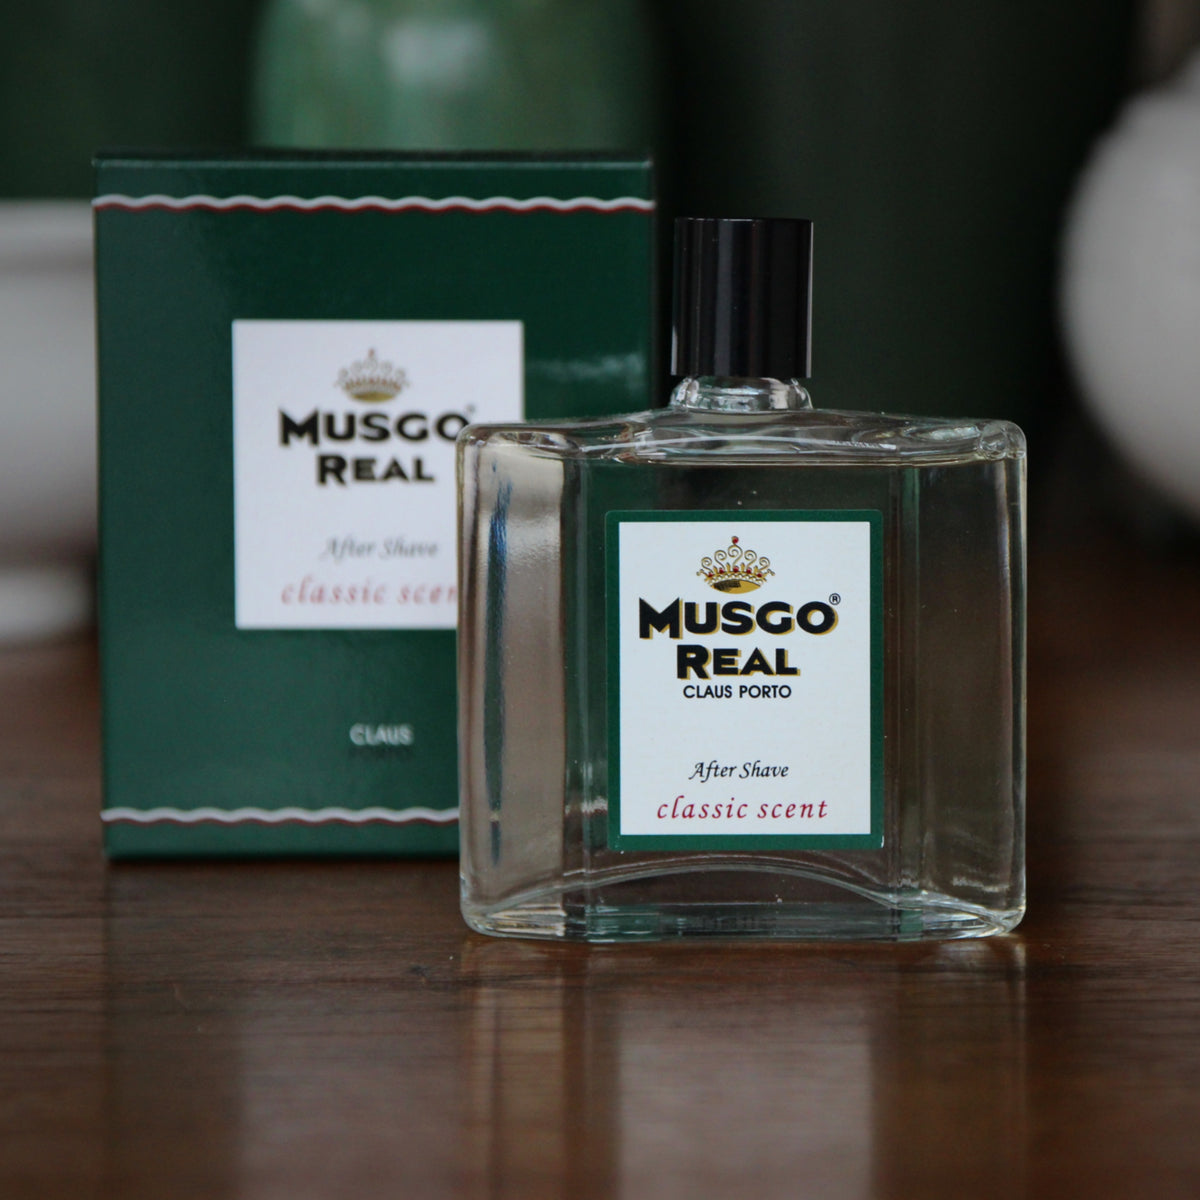 Musgo Real After Shave  Erica's Boutique and Skin Care Center